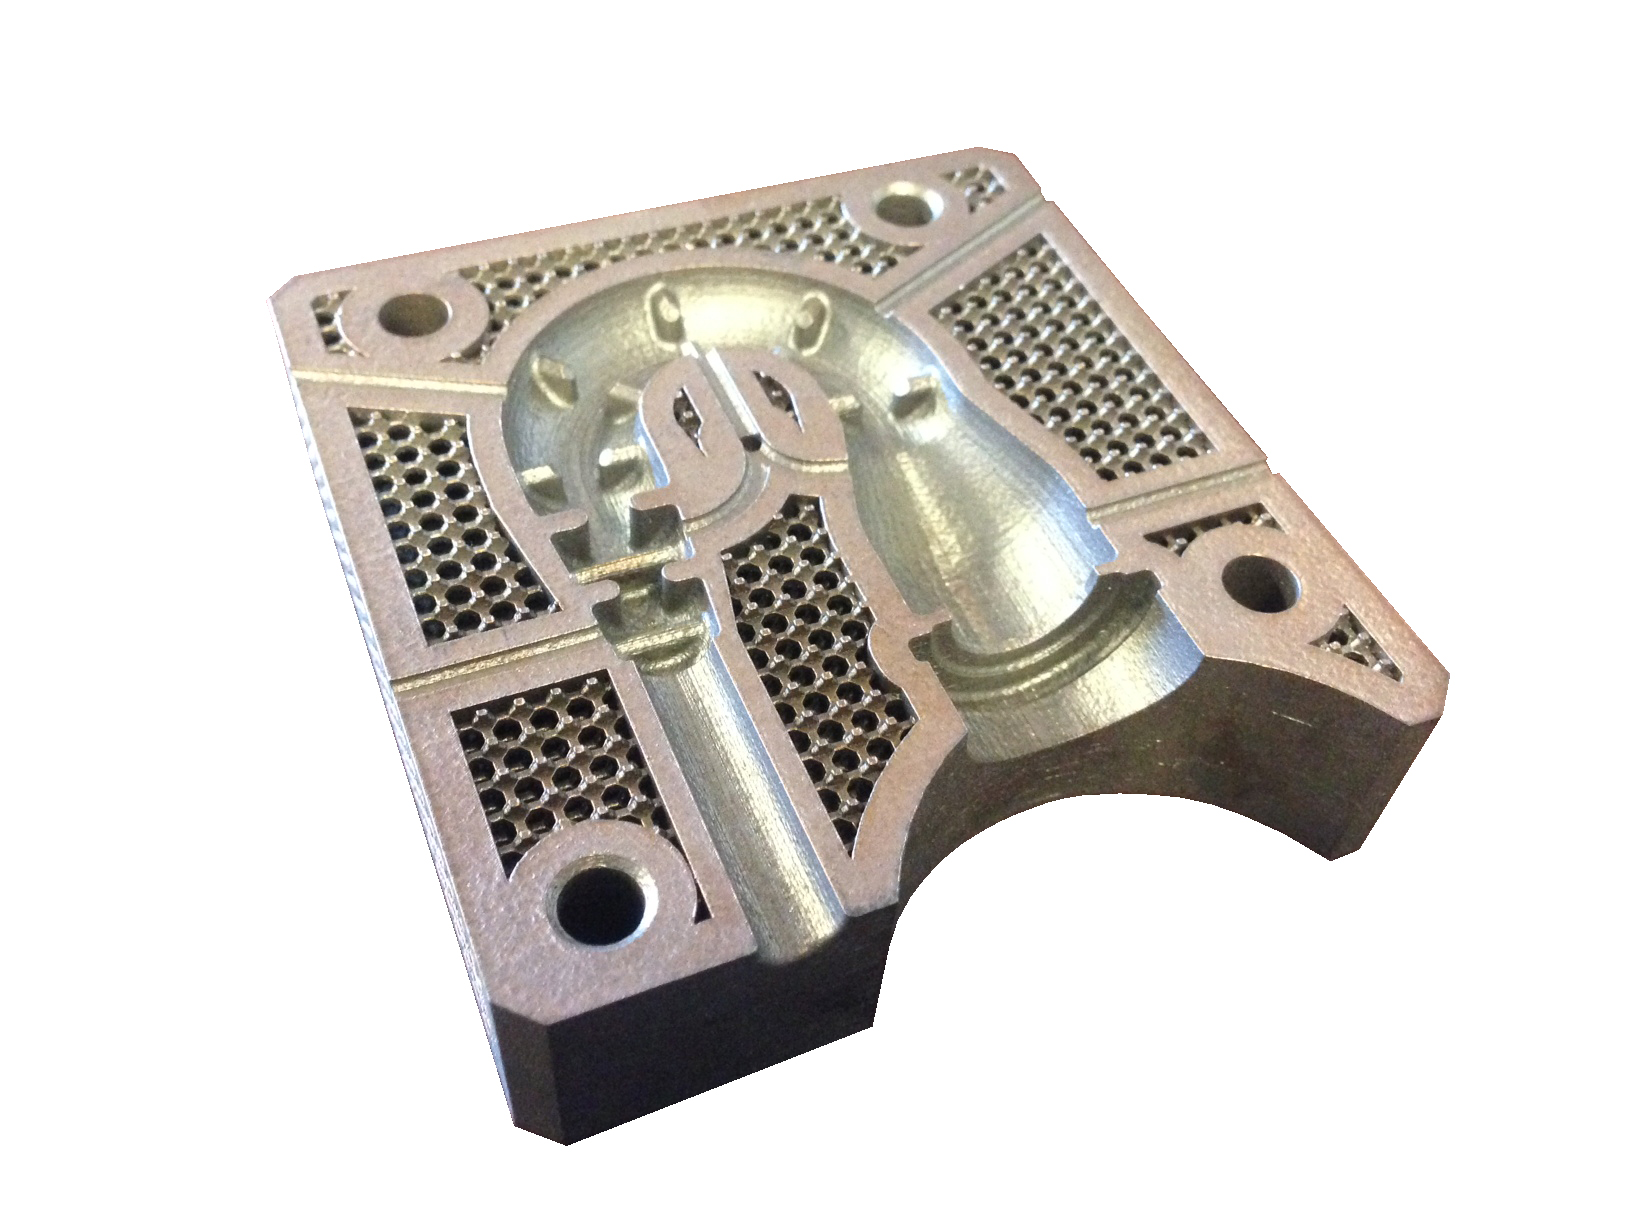 I3DMFG  print technology allows the manufacture of metal products for industrial uses